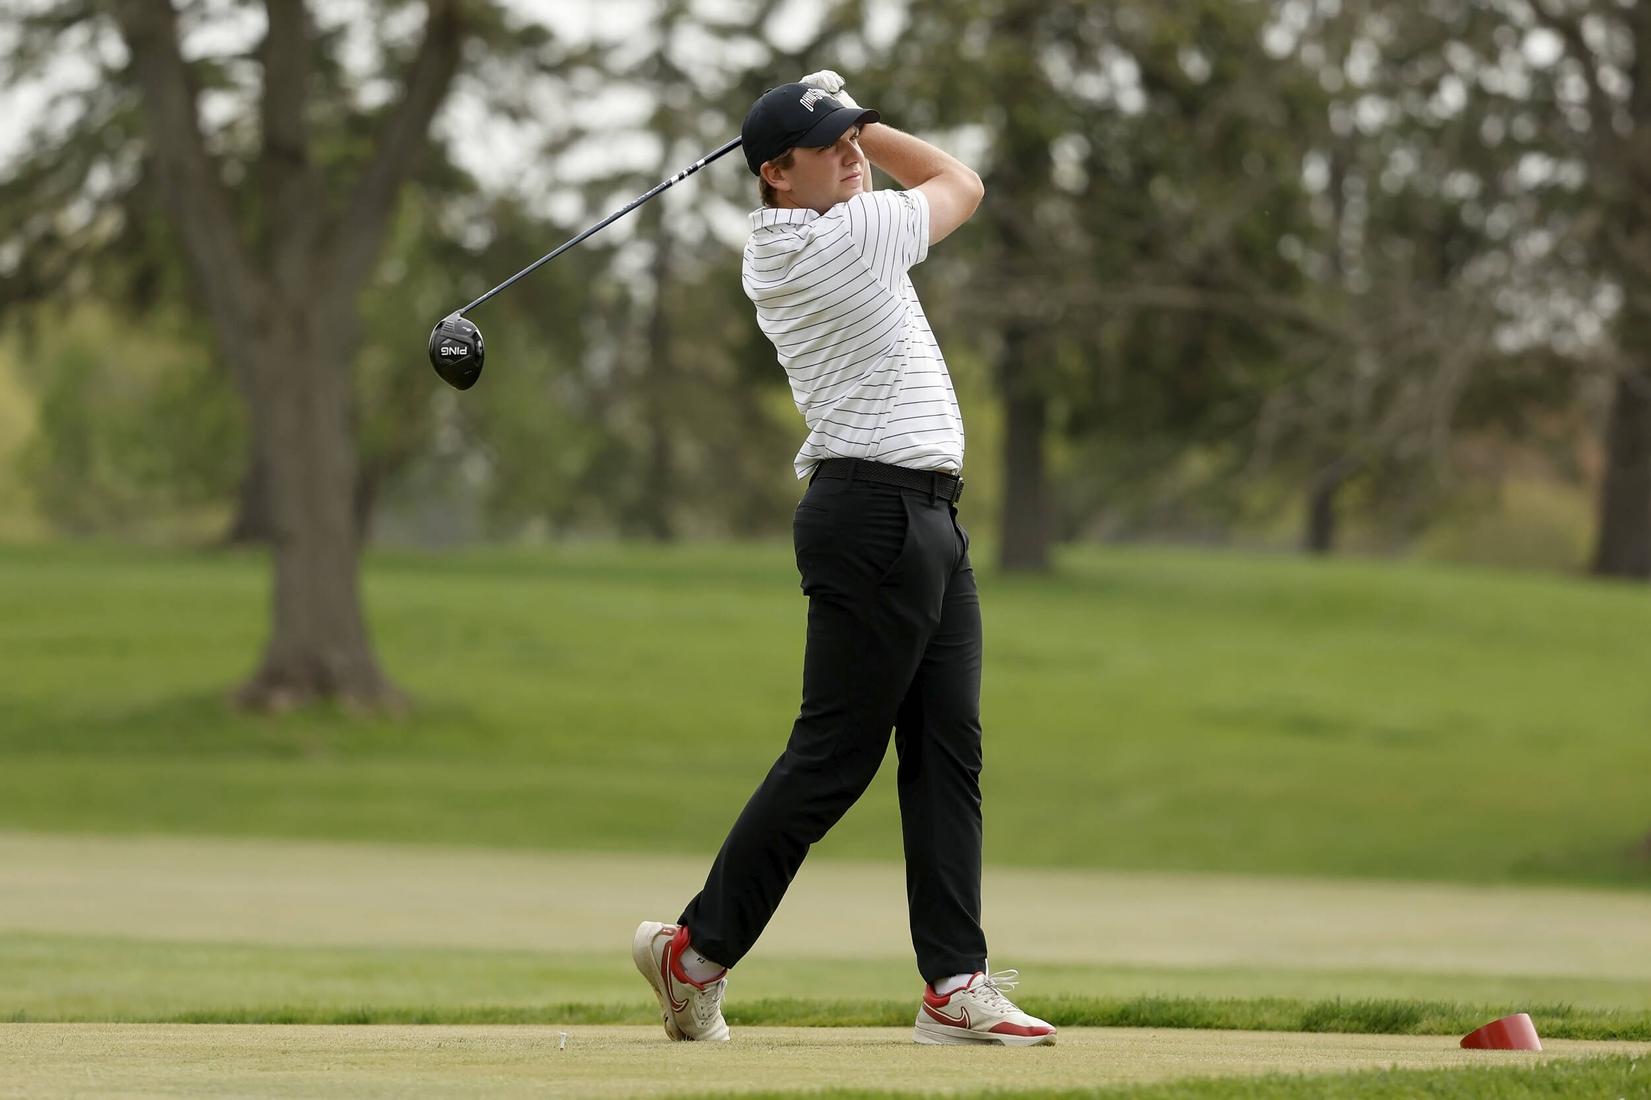 Buckeyes Lead After Day 1 of Kepler Intercollegiate - Ohio State